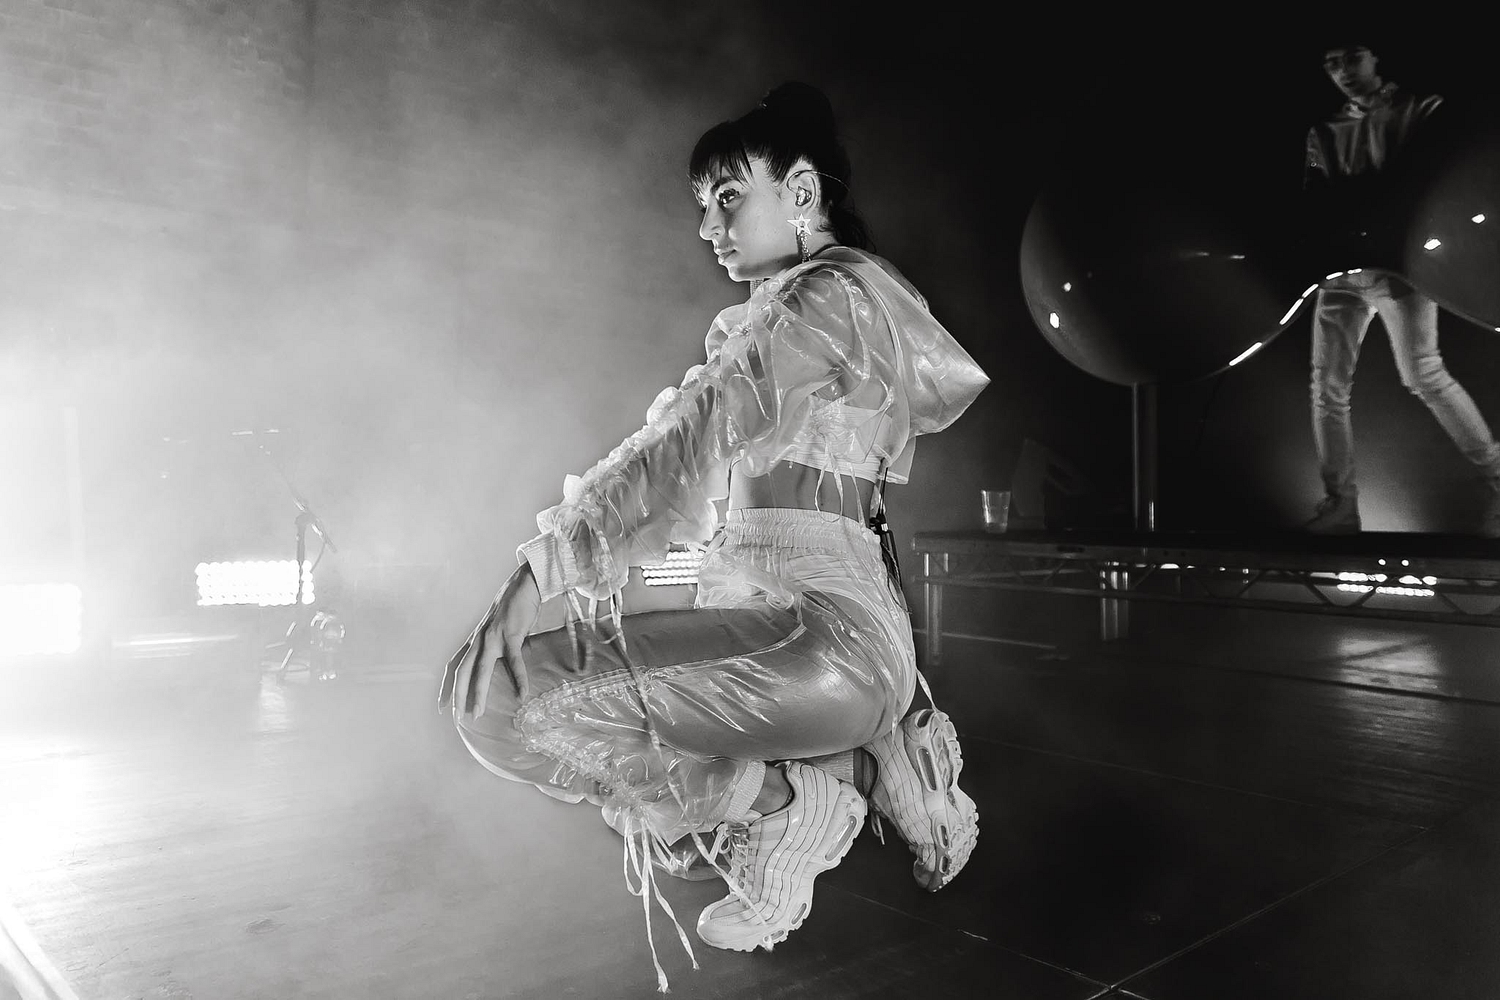 It’s Charli, baby: A comprehensive guide to Charli XCX